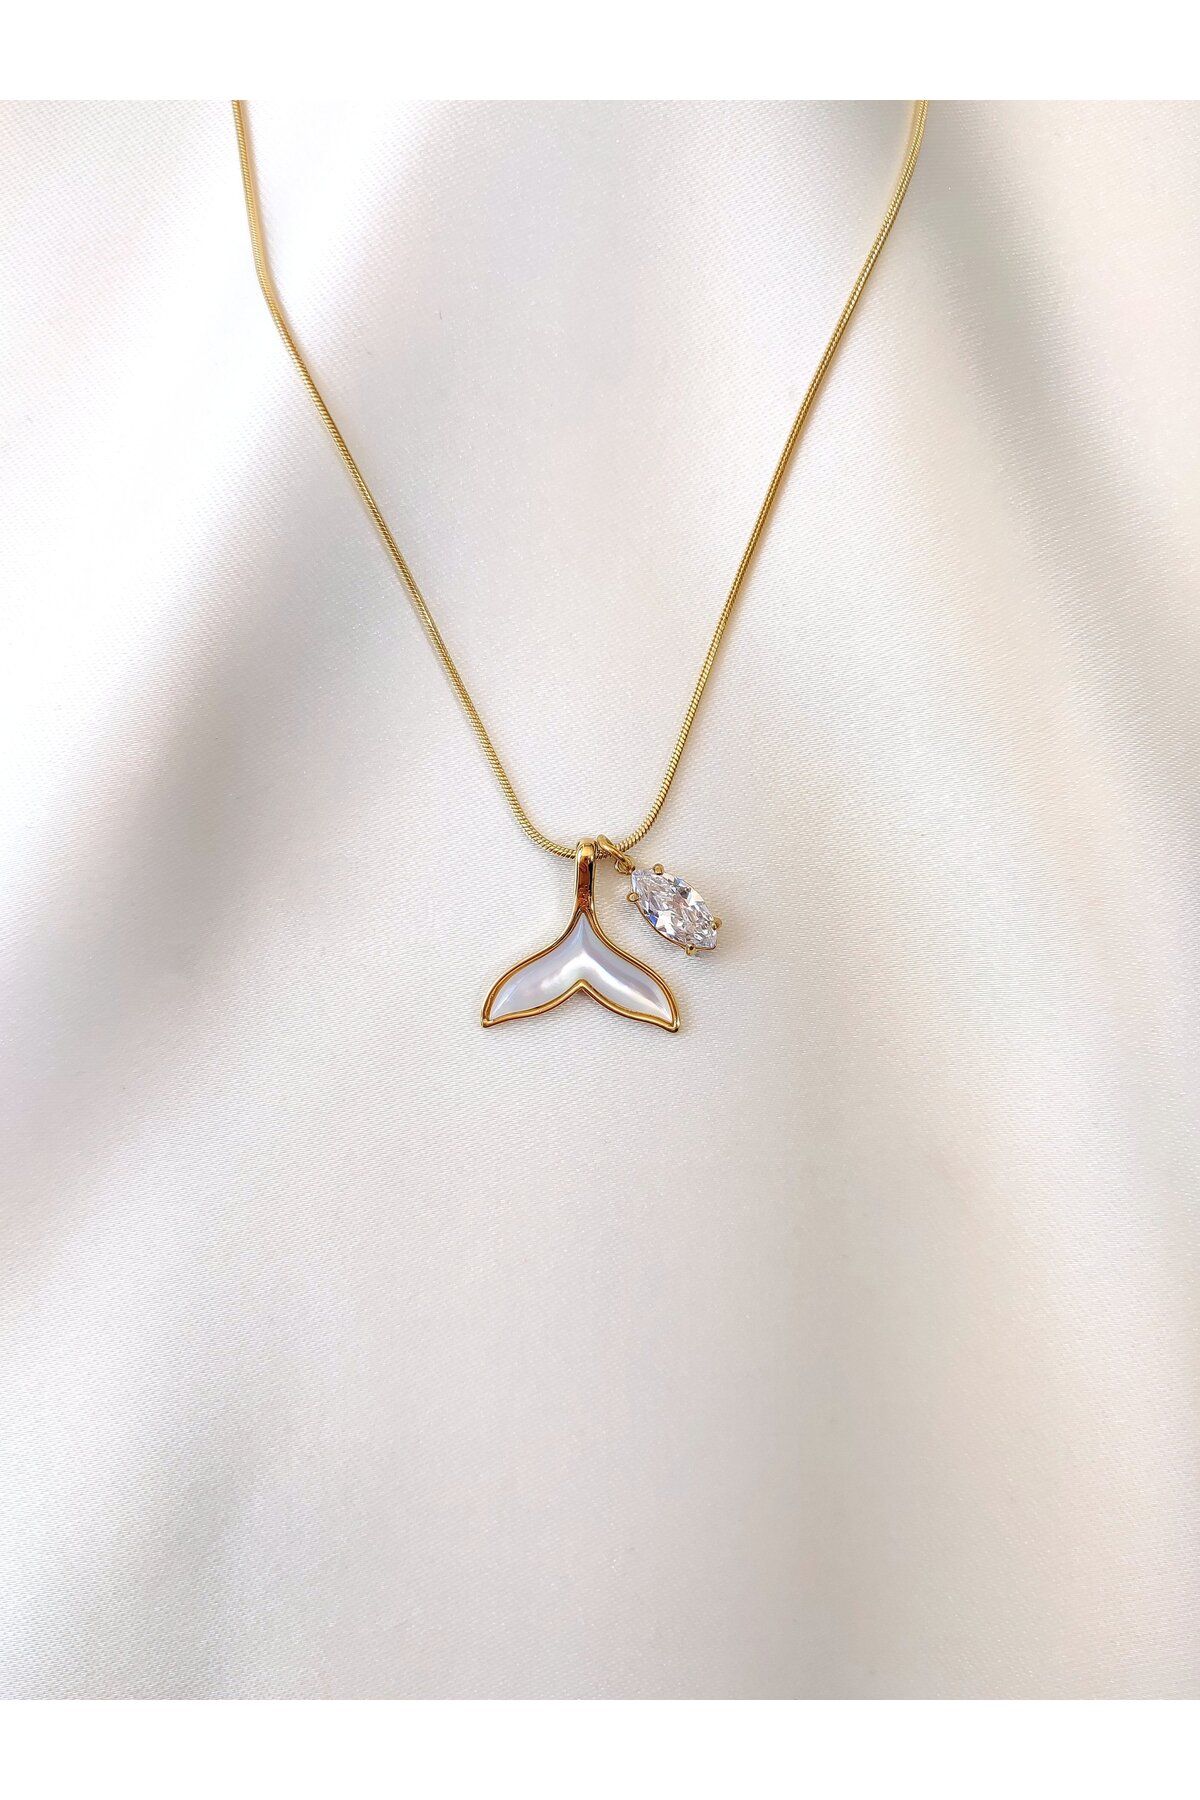 9ct Gold Whale Tail Necklace —